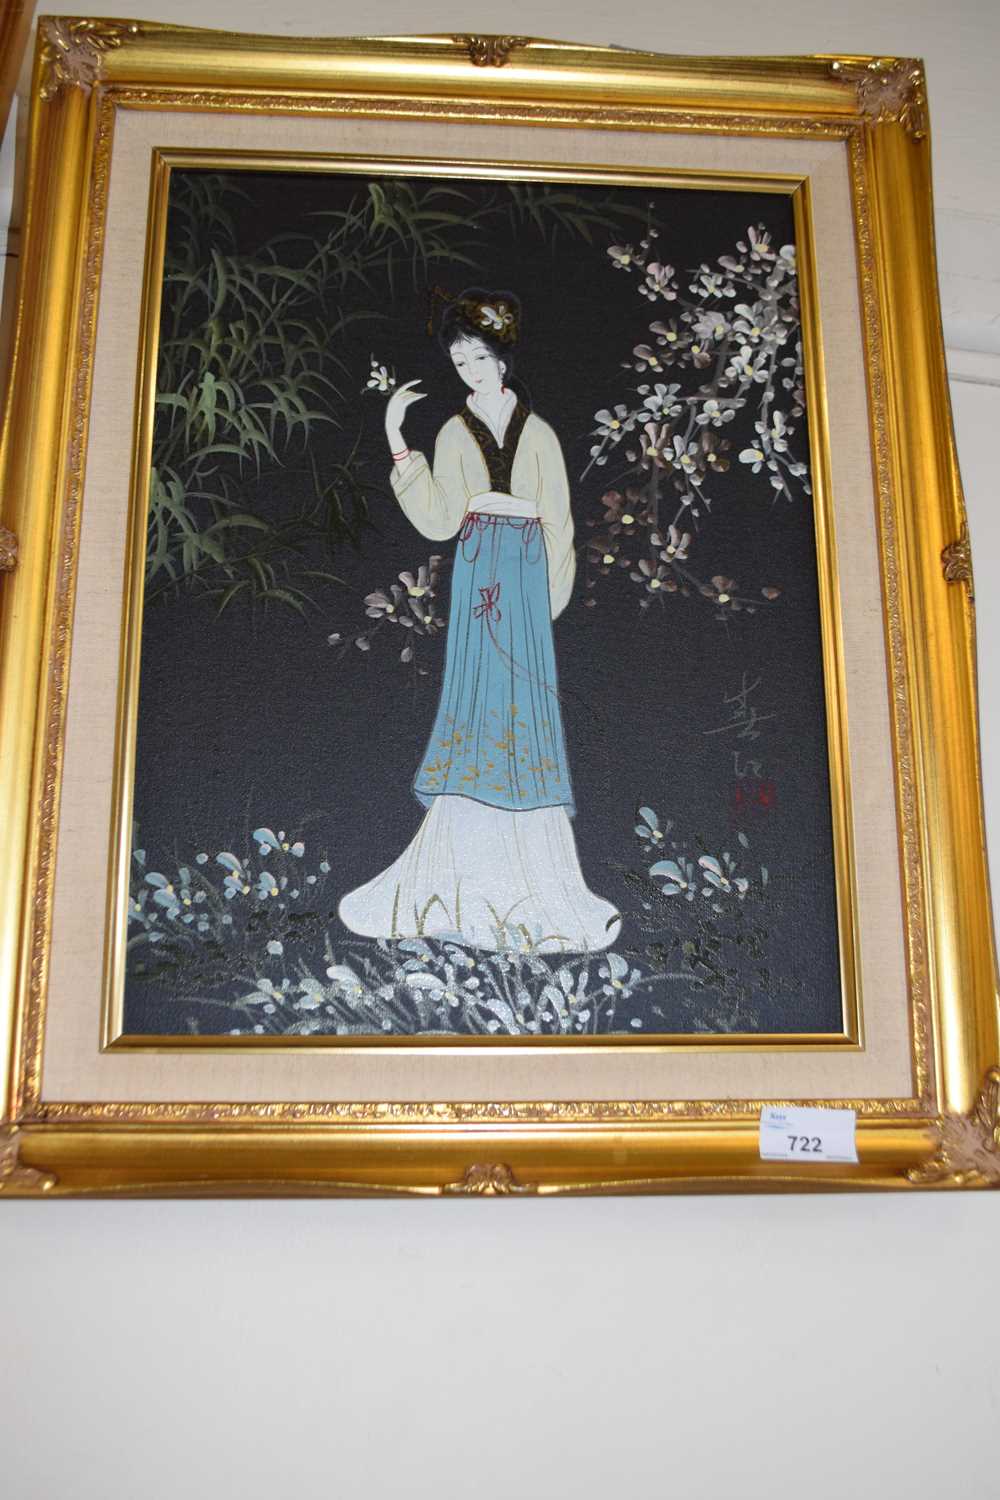 Study of a Chinese maiden in gilt frame